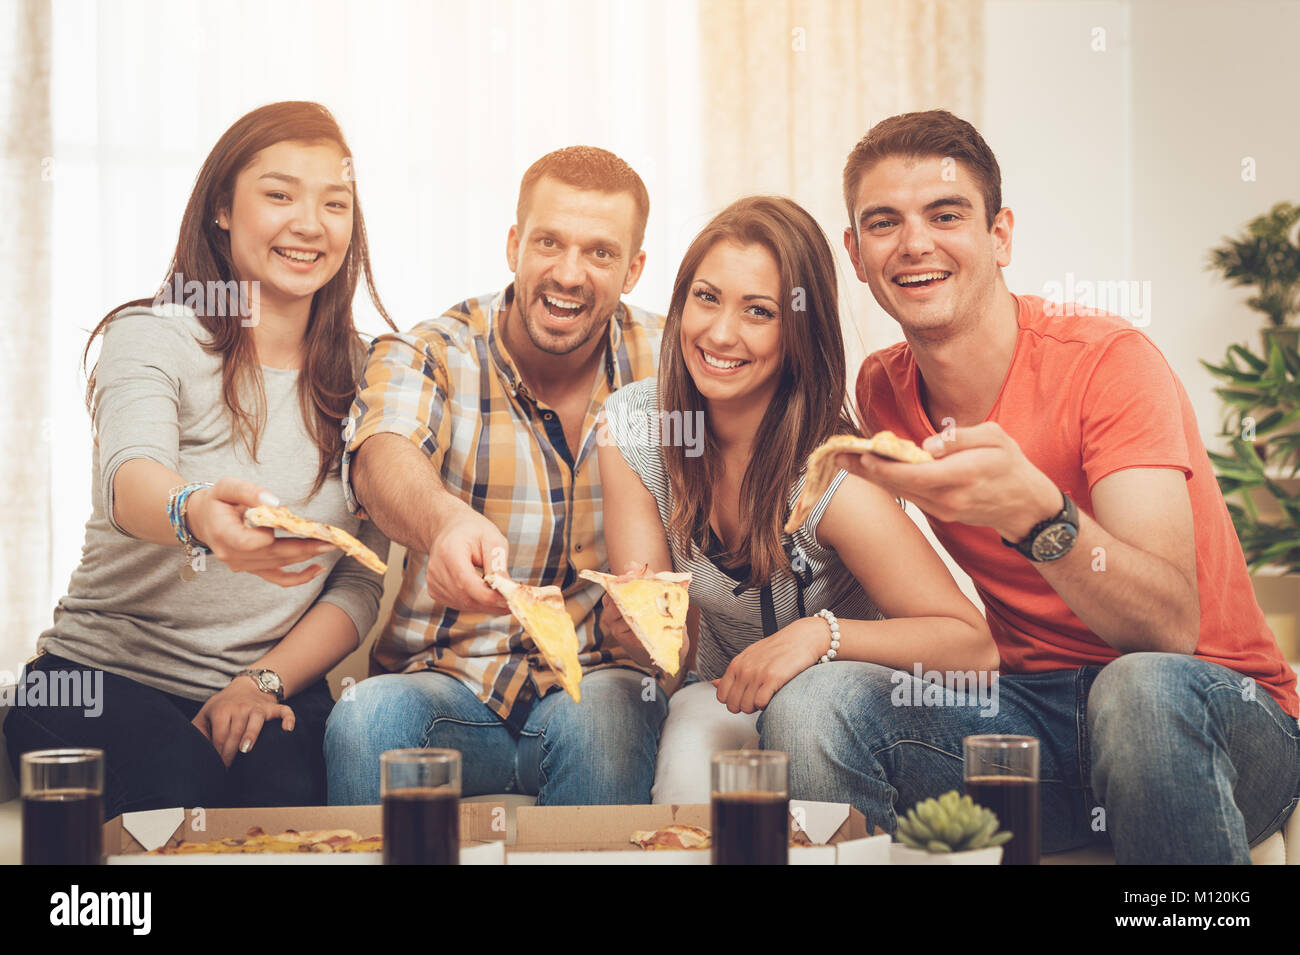 Four cheerful friends hanging out in an apartment. They are eating ...